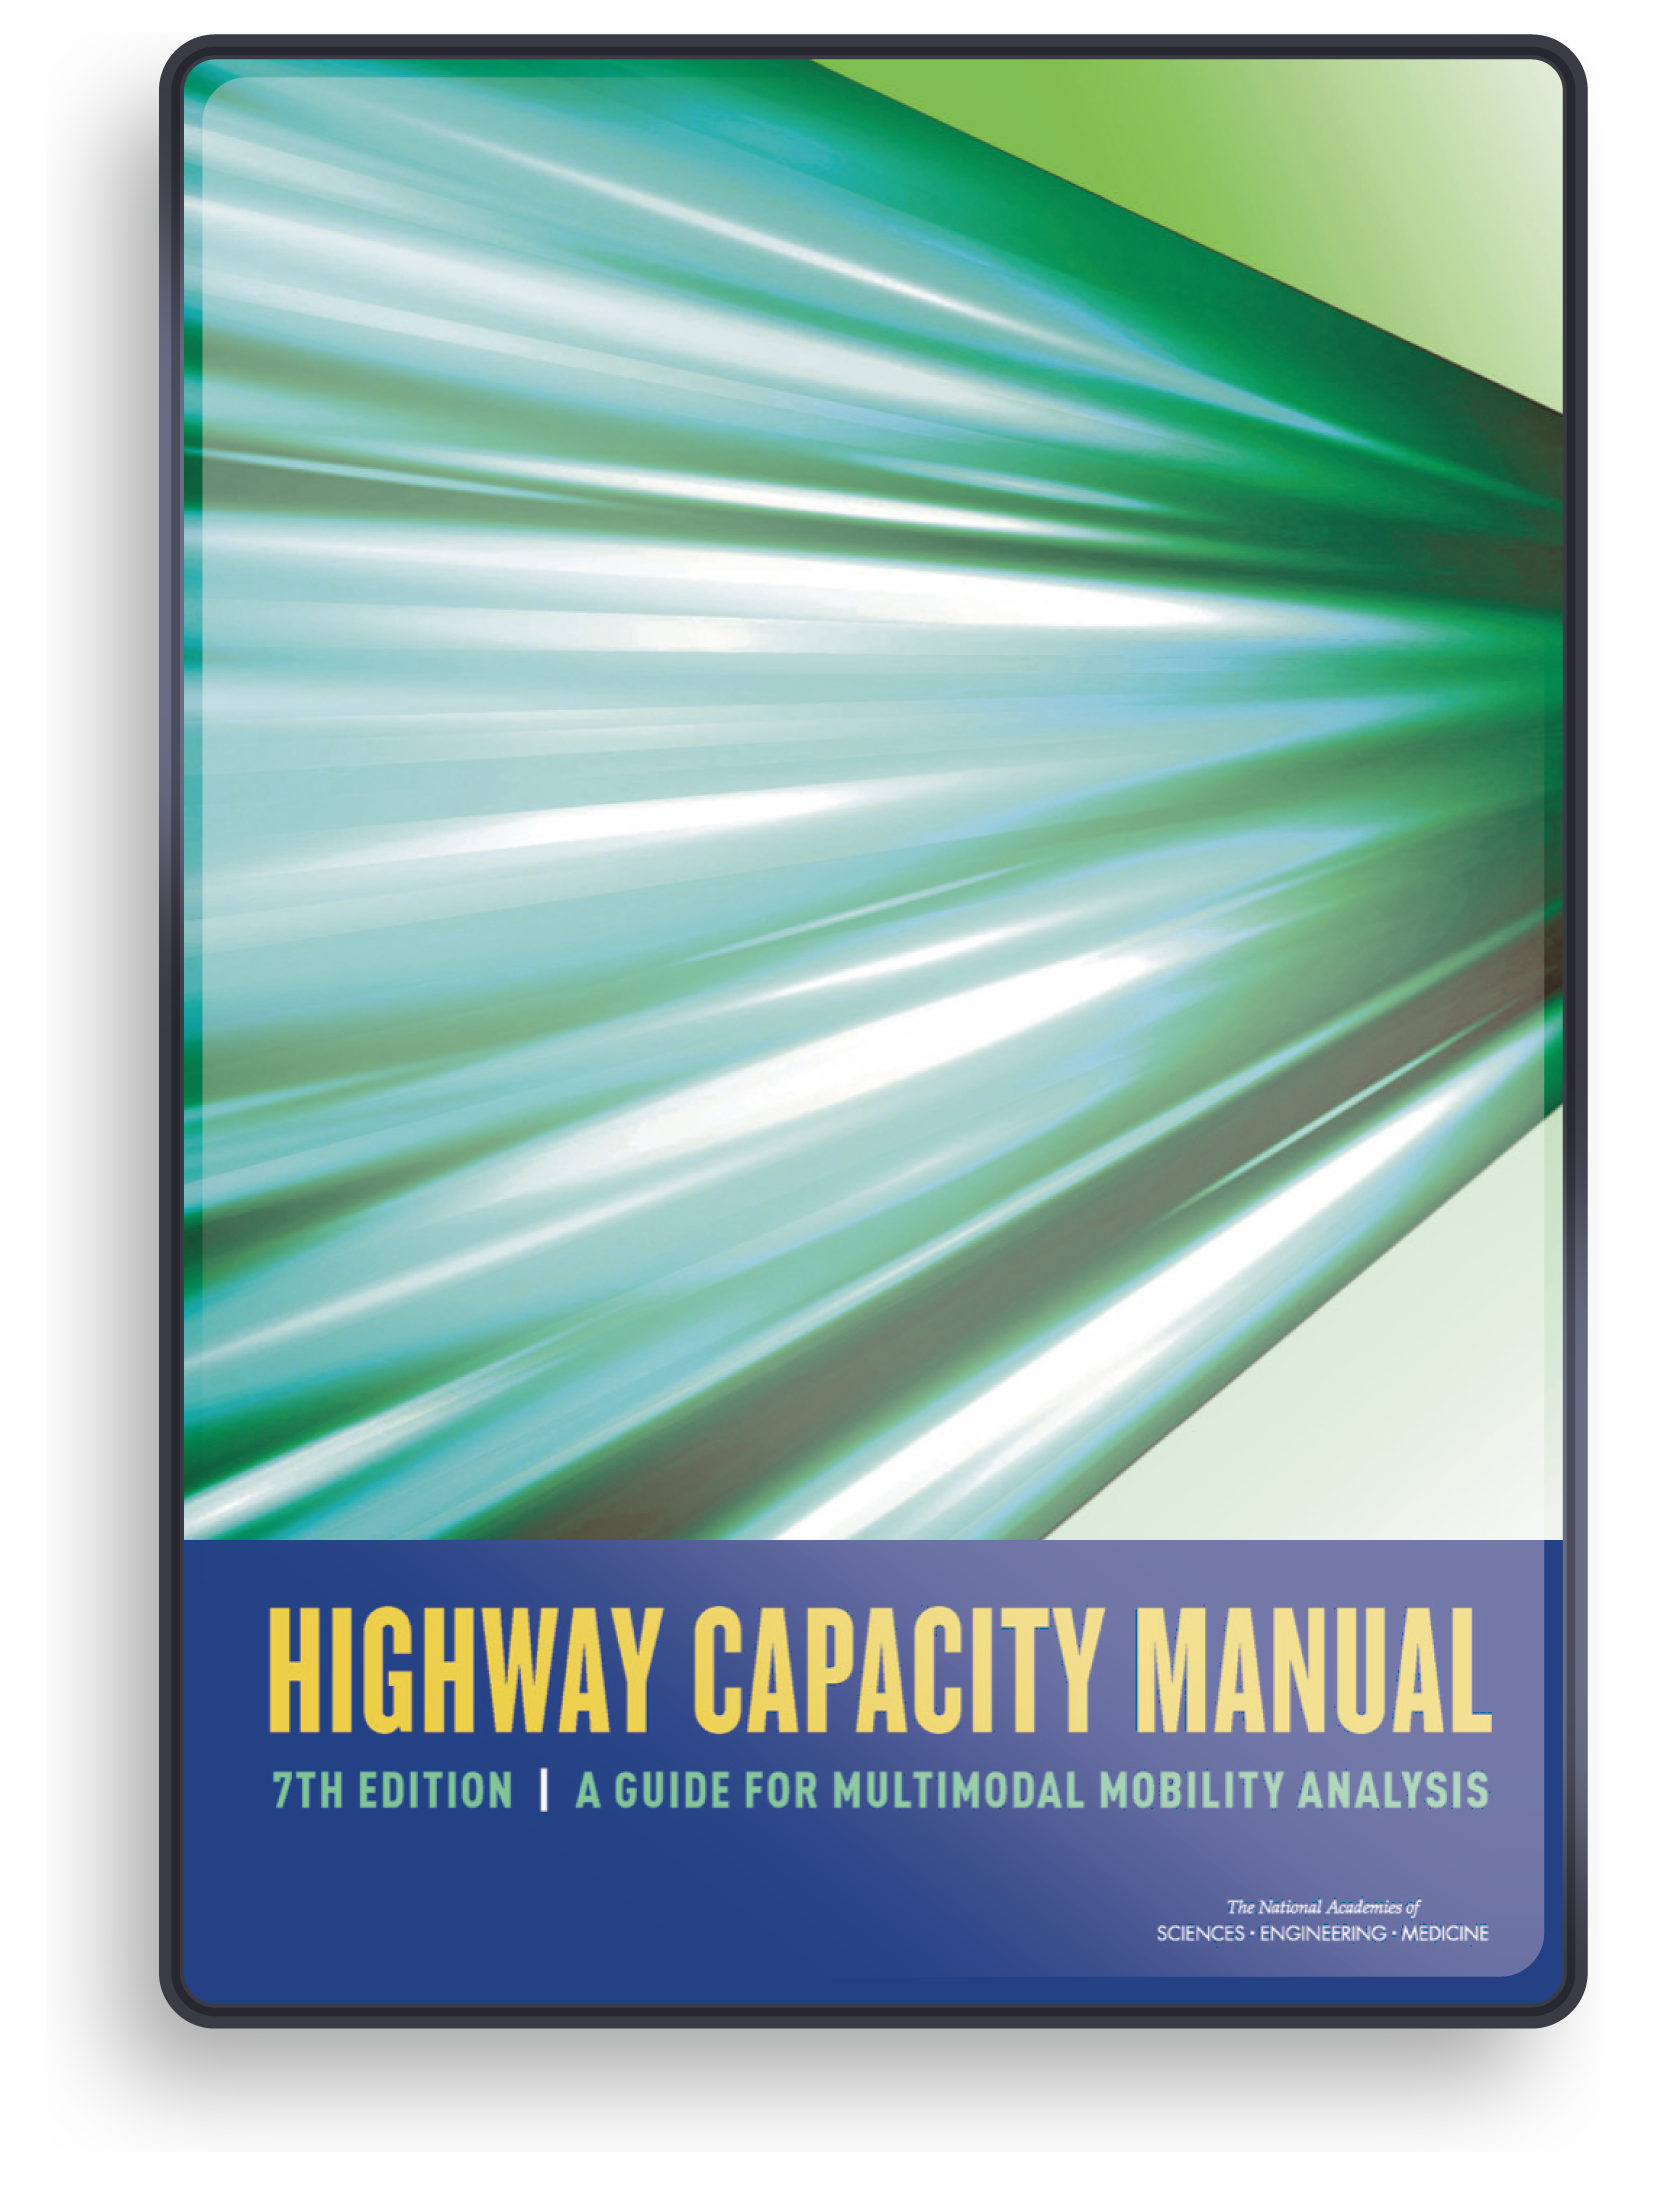 7th Edition of of Highway Capacity Manual (HCM)